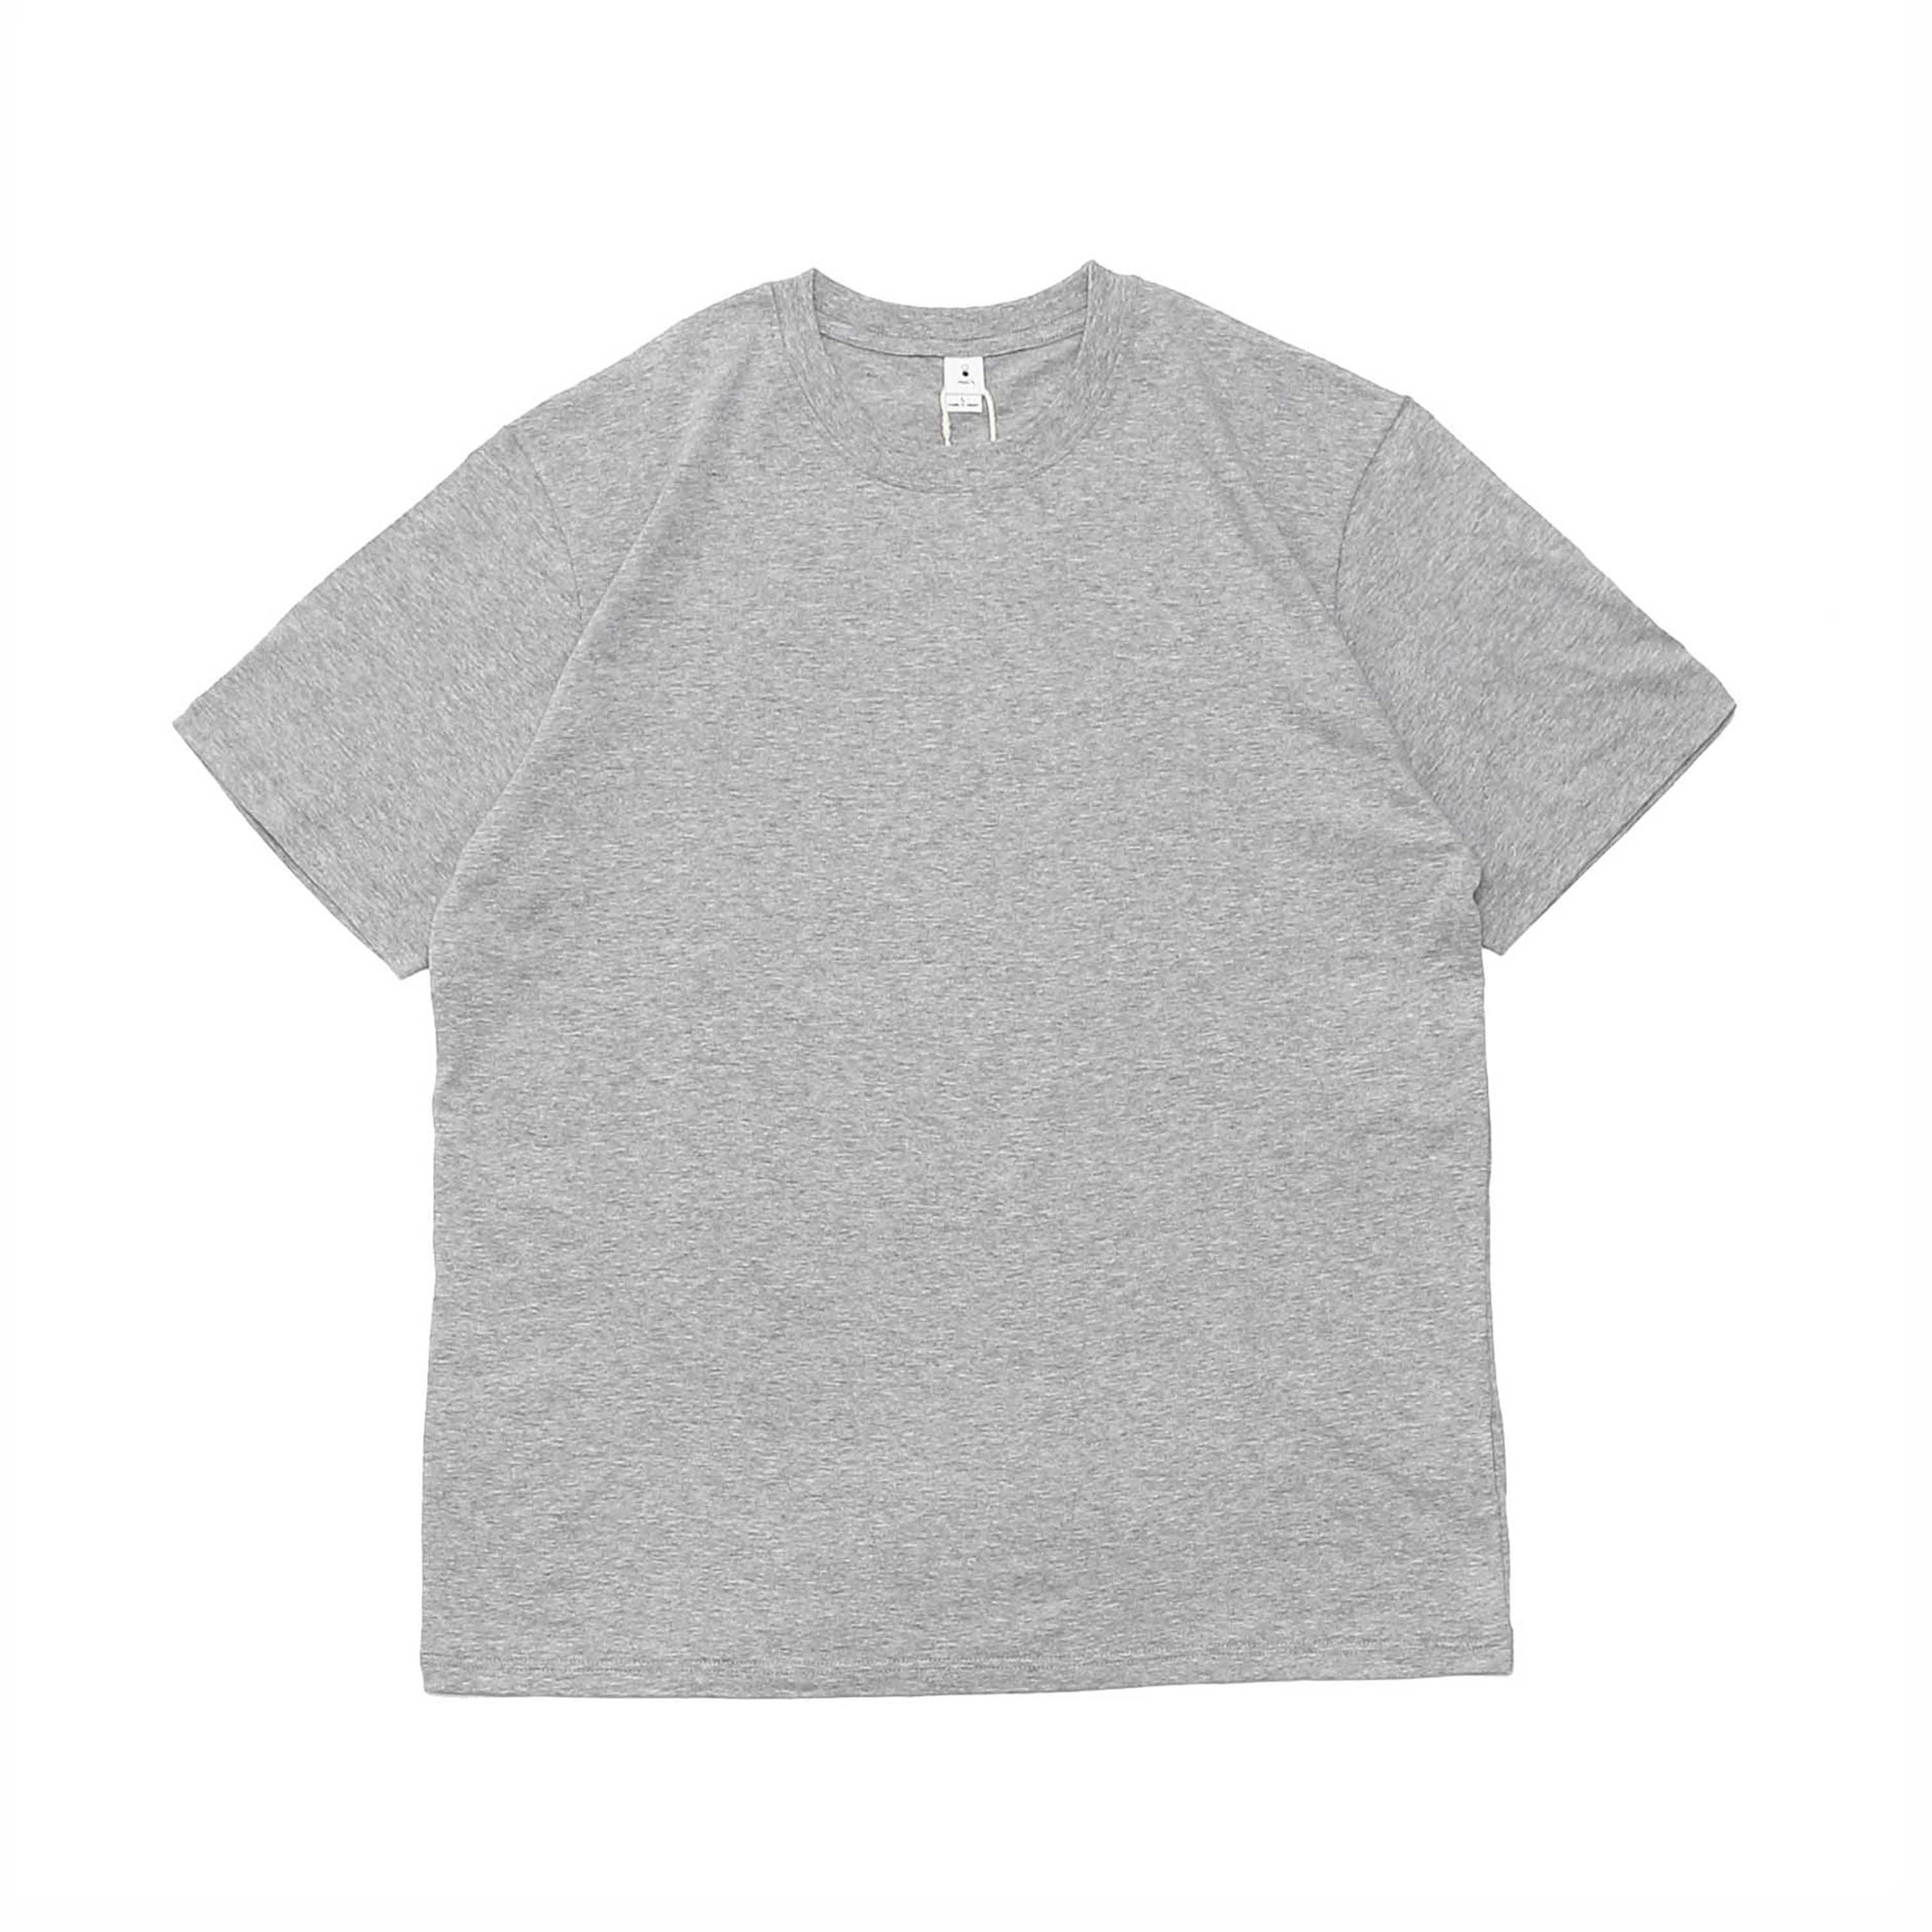 STANDARD FIT S/S TEE(M10-100) - HEATHER GRAY